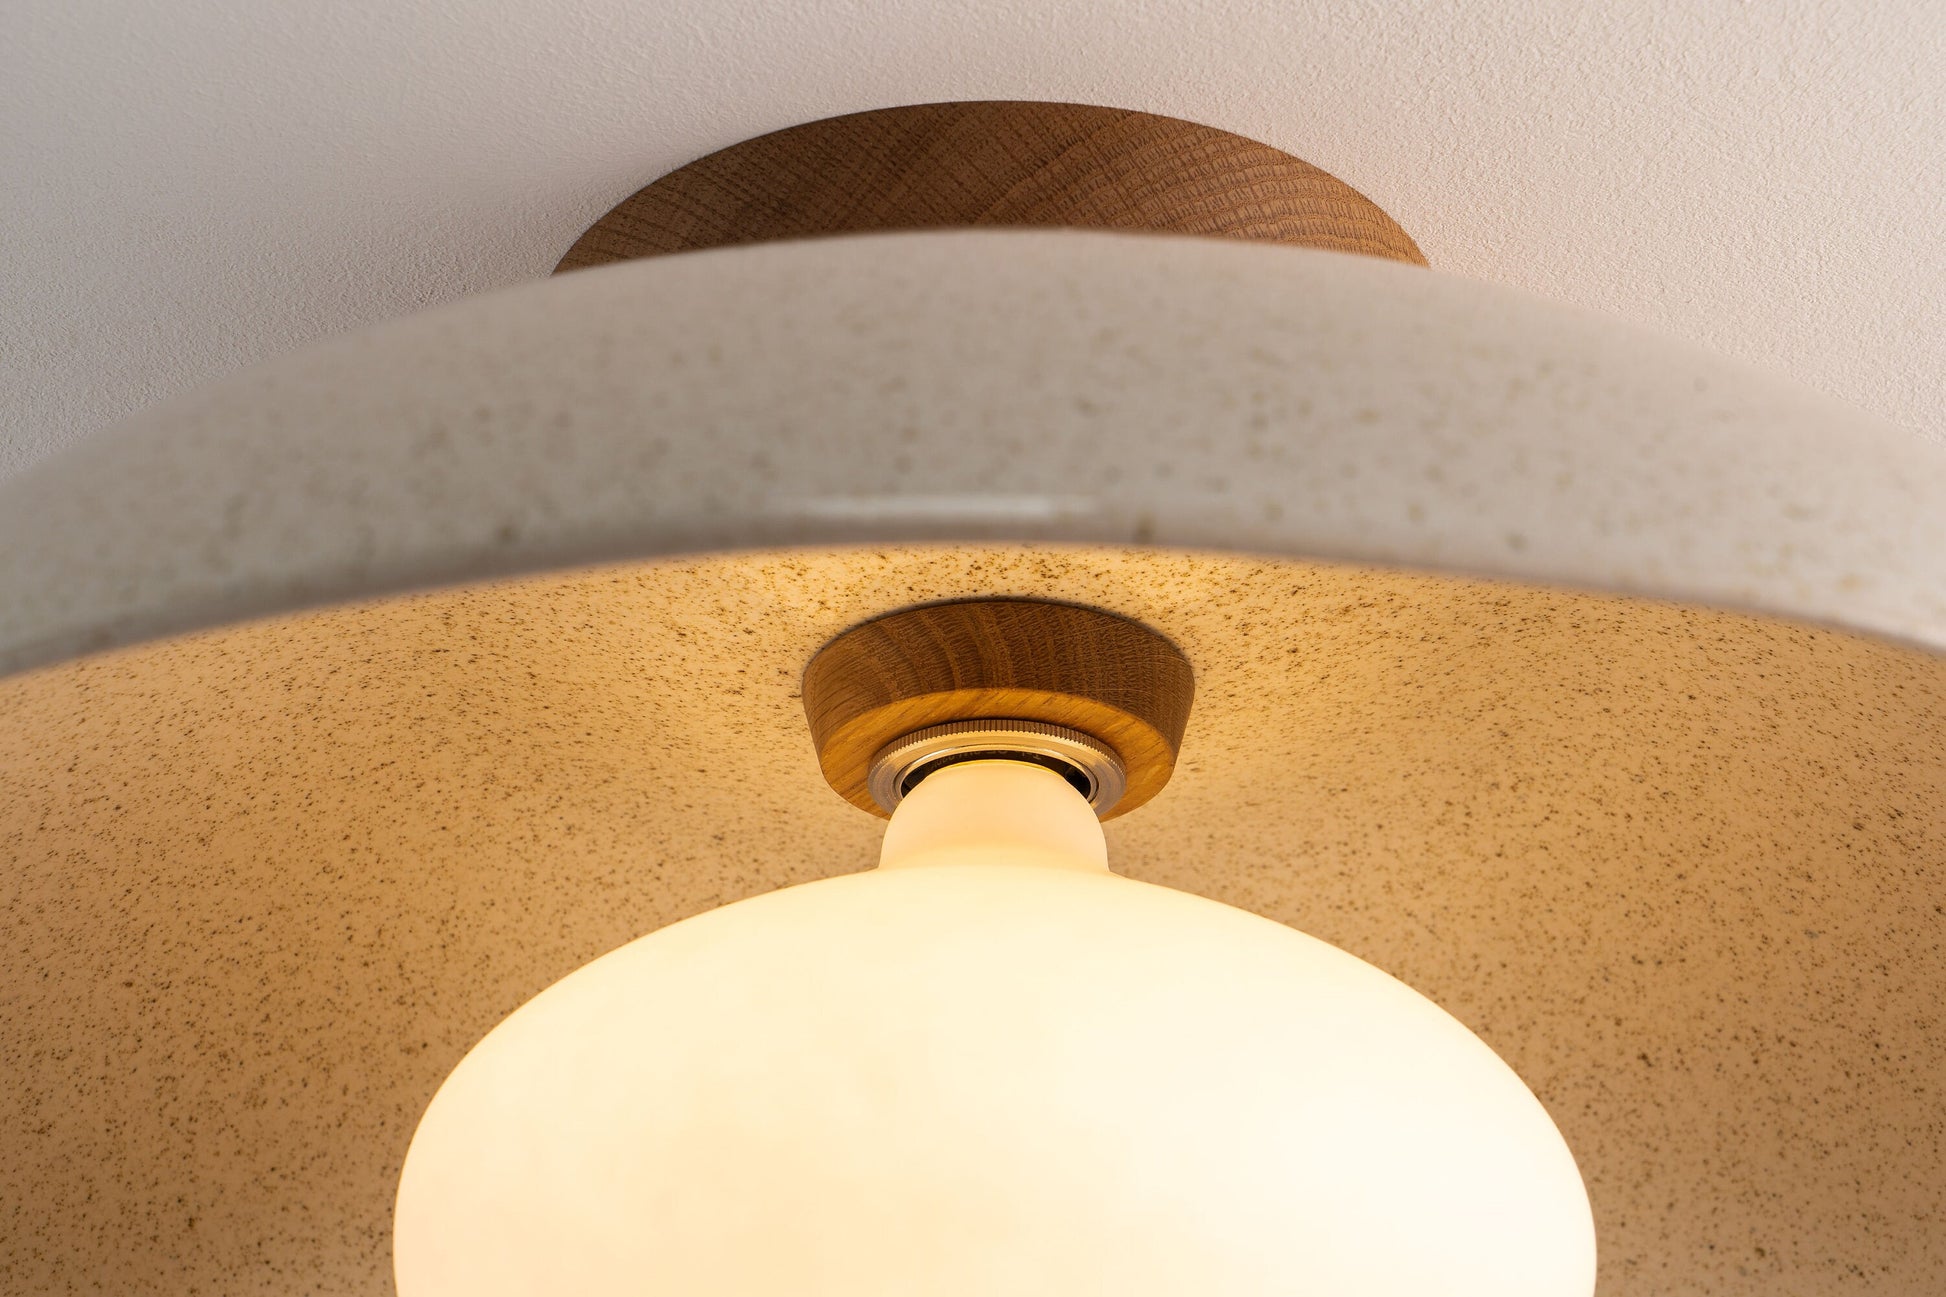 Speckled Cream Gloss XL Dawn Flush Mount Ceiling Light in Ceramic and Oak by StudioHaran